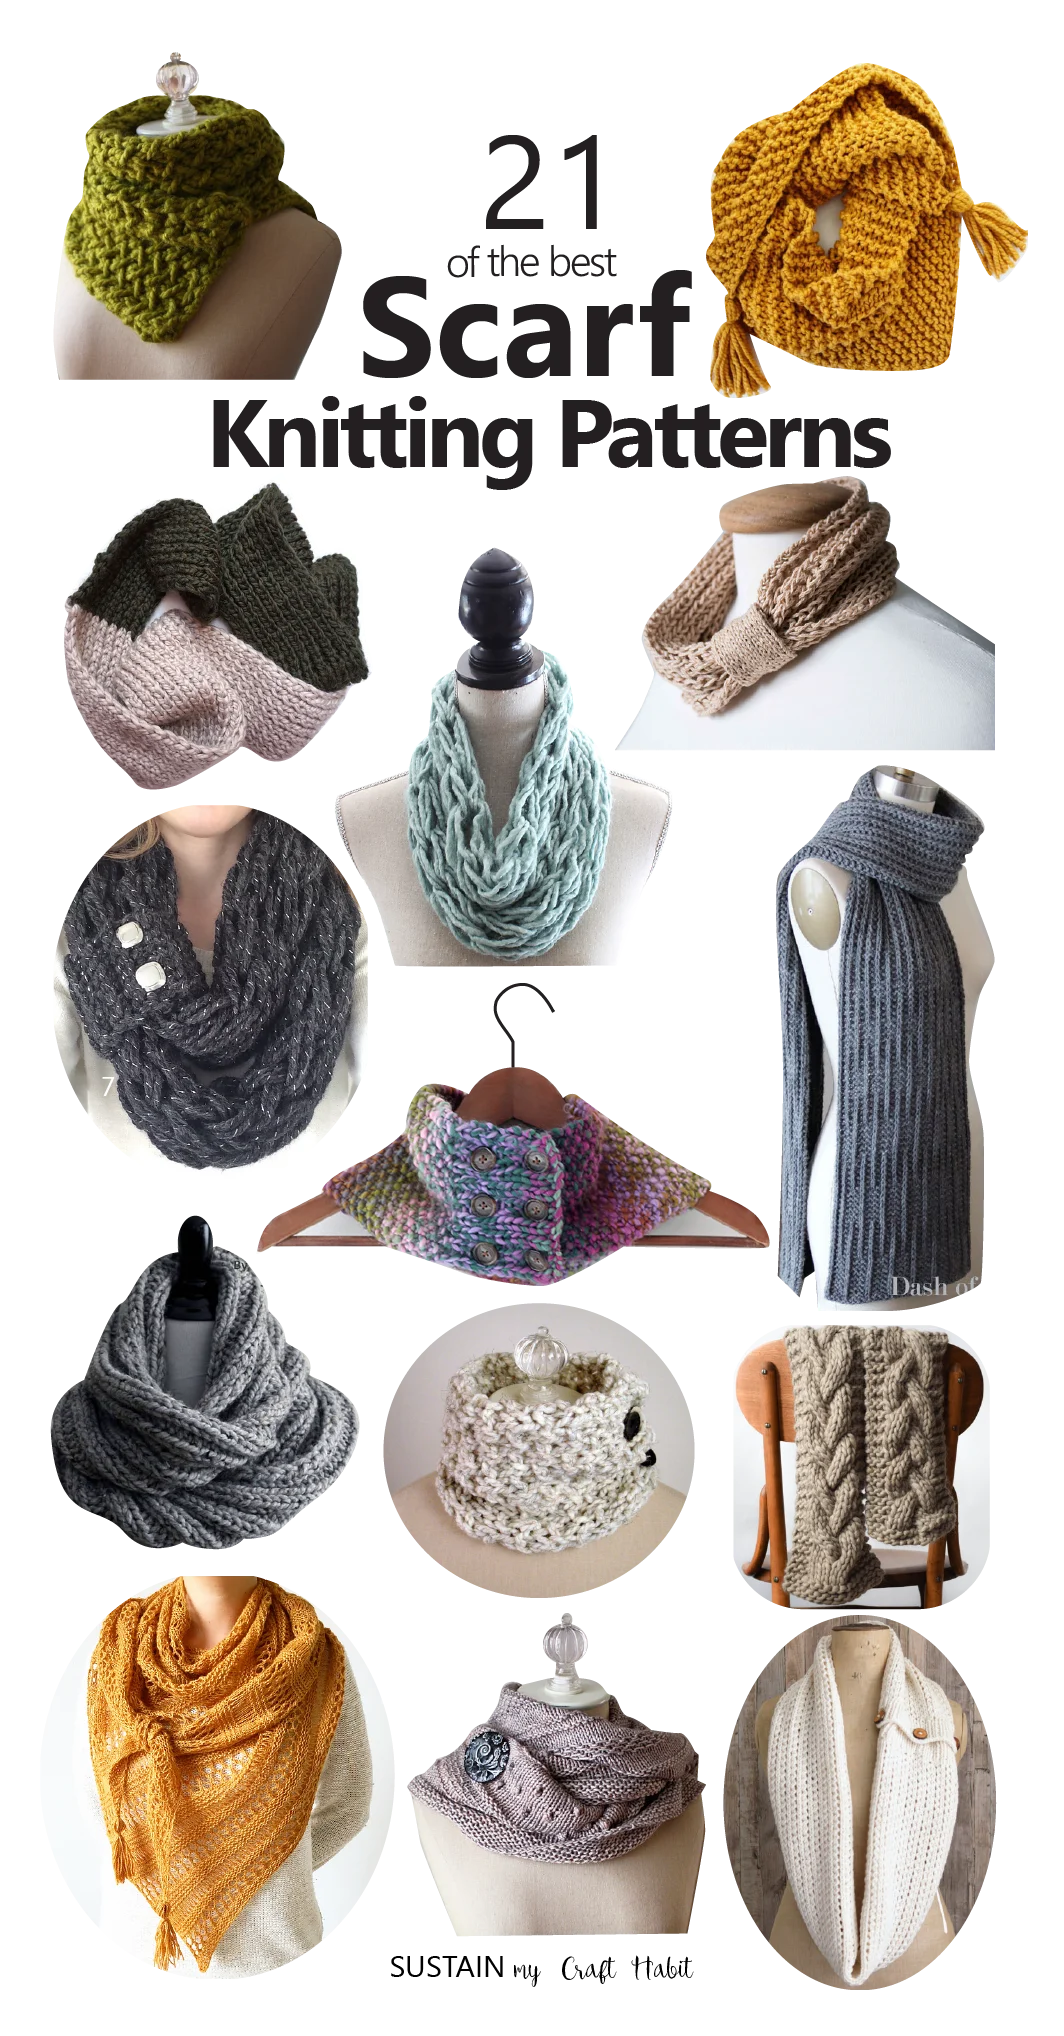 21 of the Best Scarf Knitting Patterns – Sustain My Craft Habit